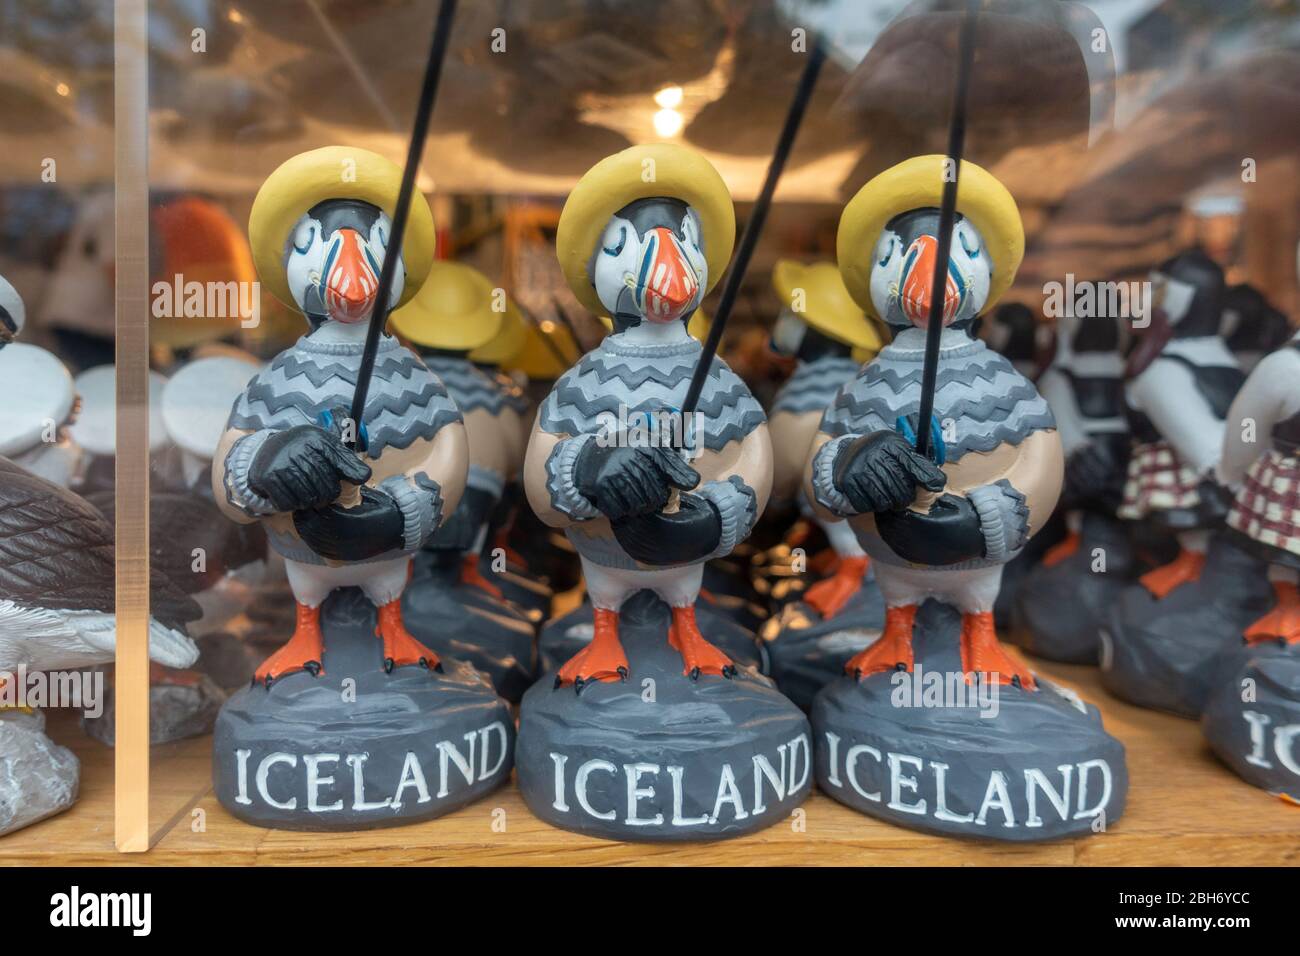 Puffin in Icelandic jumpers holding fishing rods: souvenir ornaments in a shop window in Reykjavik, Iceland. Stock Photo